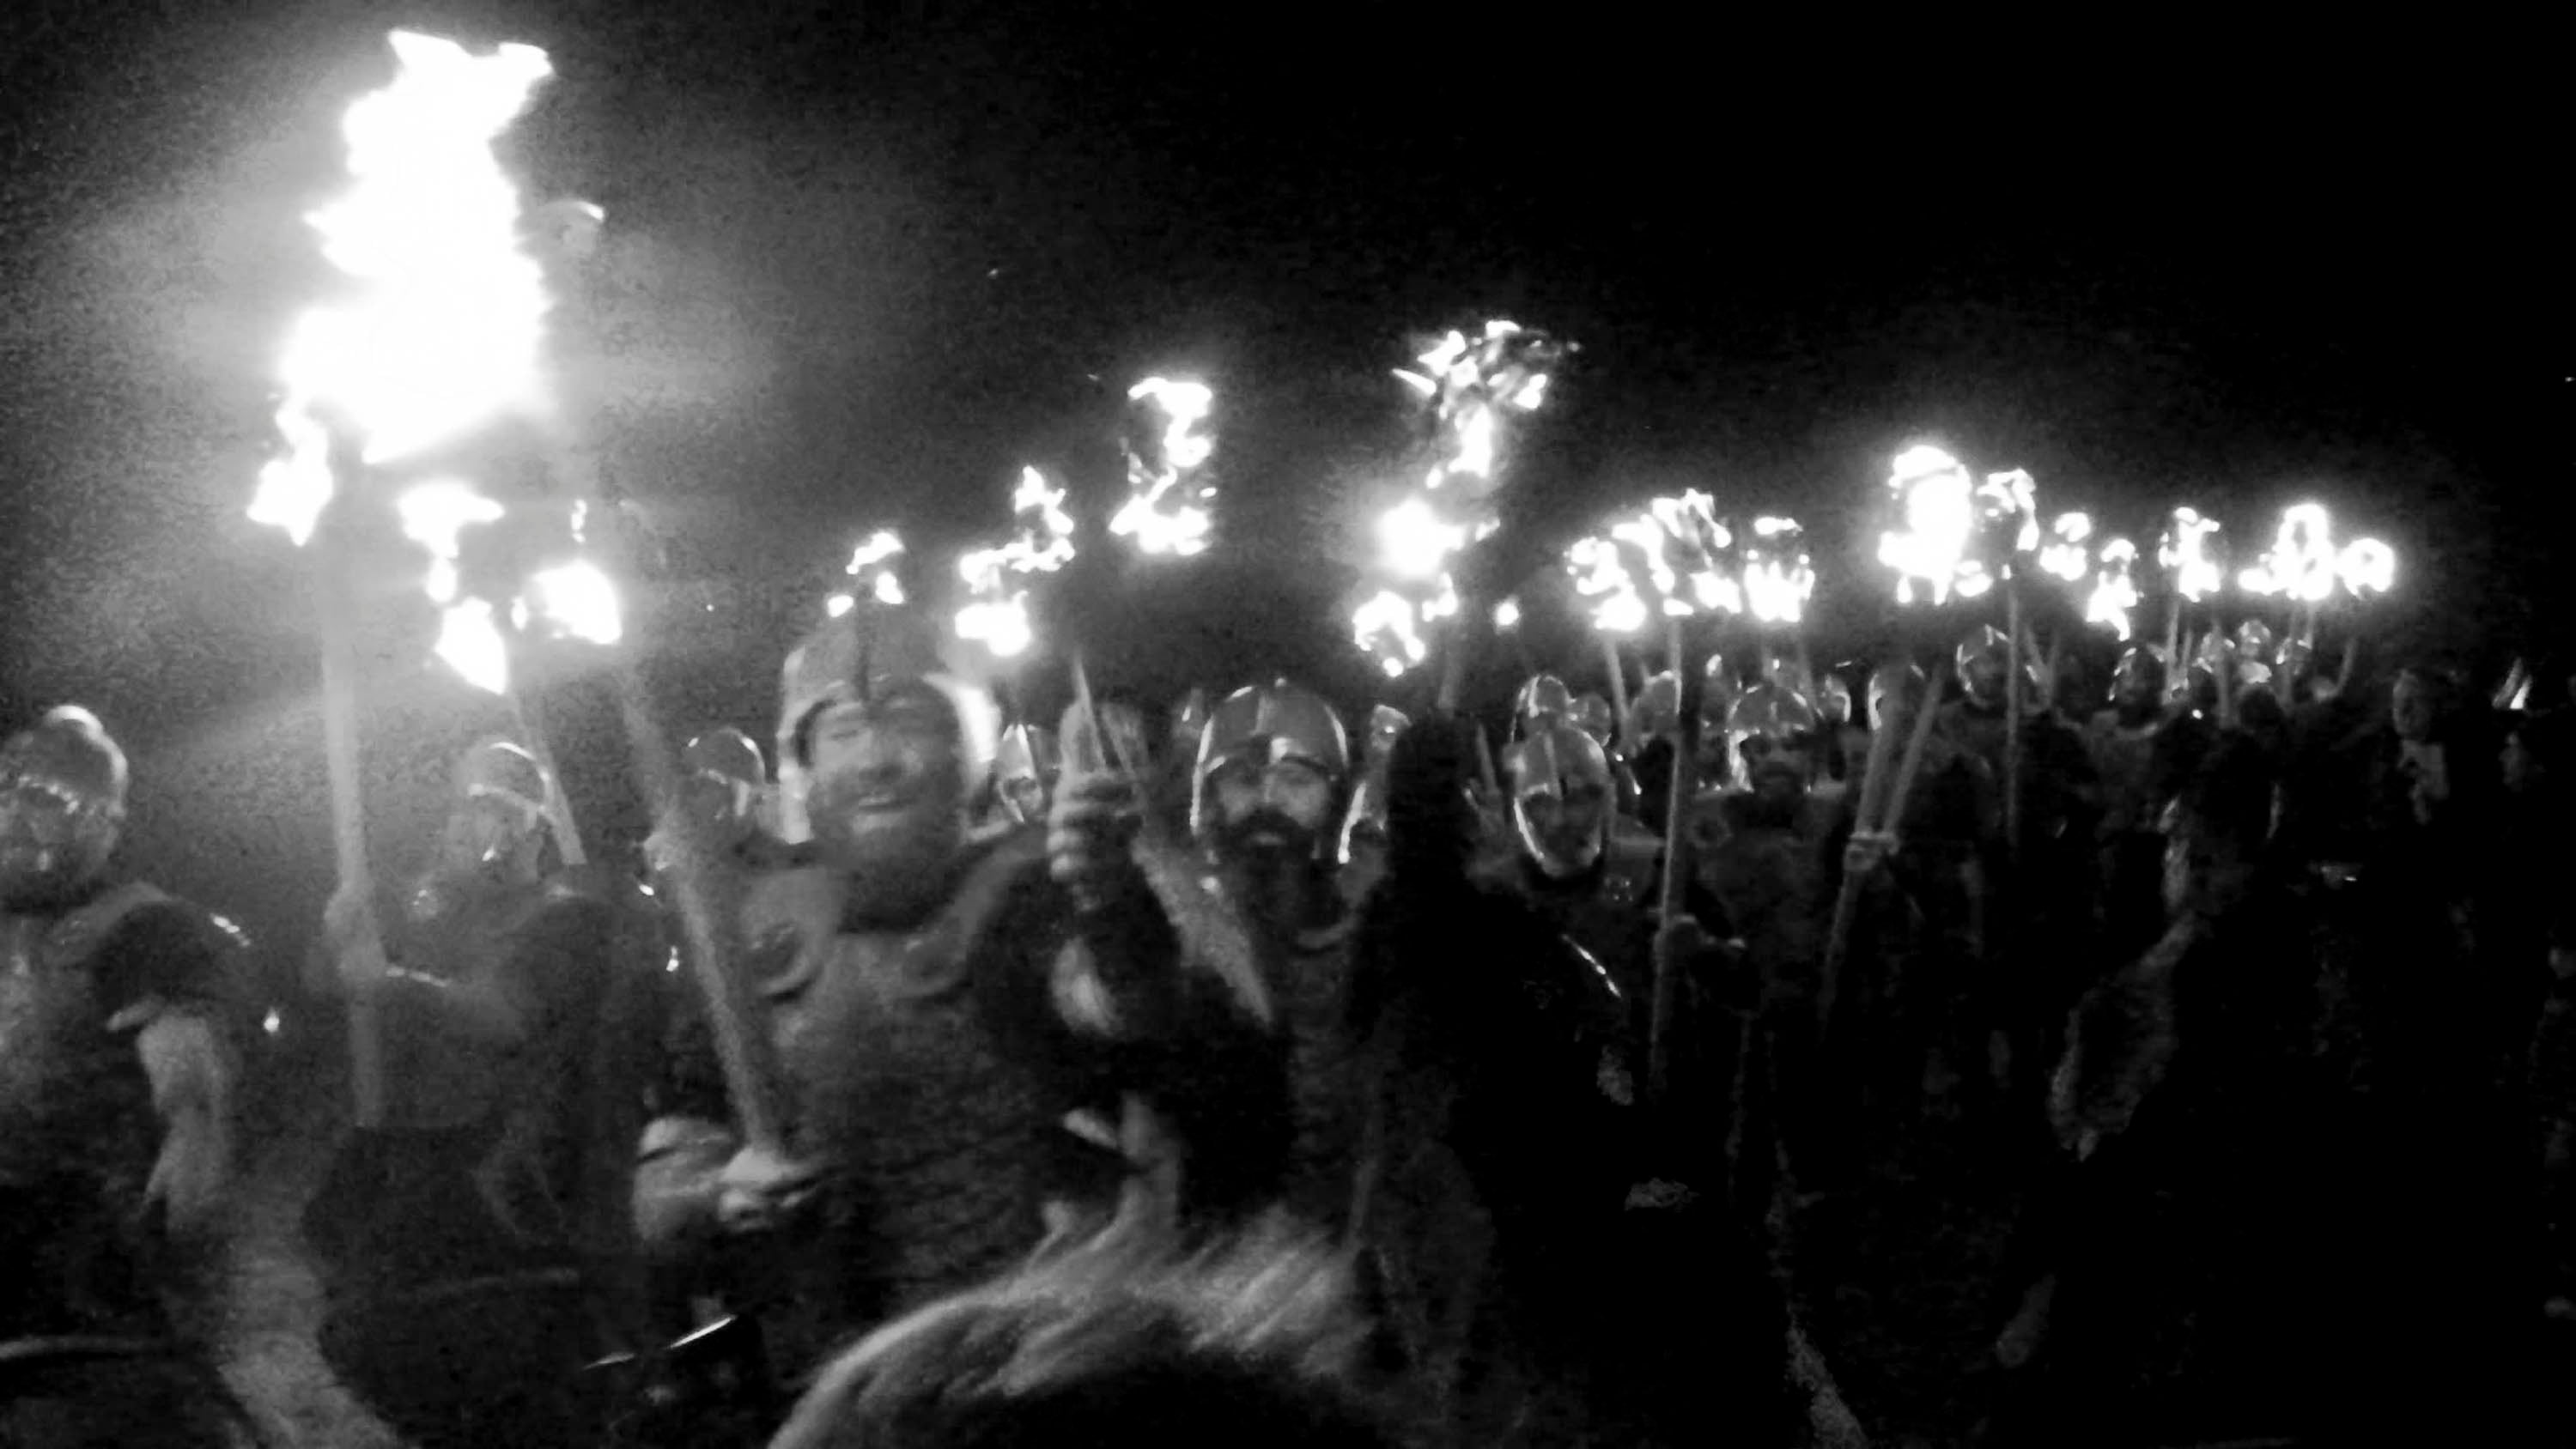 Guizers dressed as Vikings process holding torches at South Mainland Up Helly Aa - Smuha